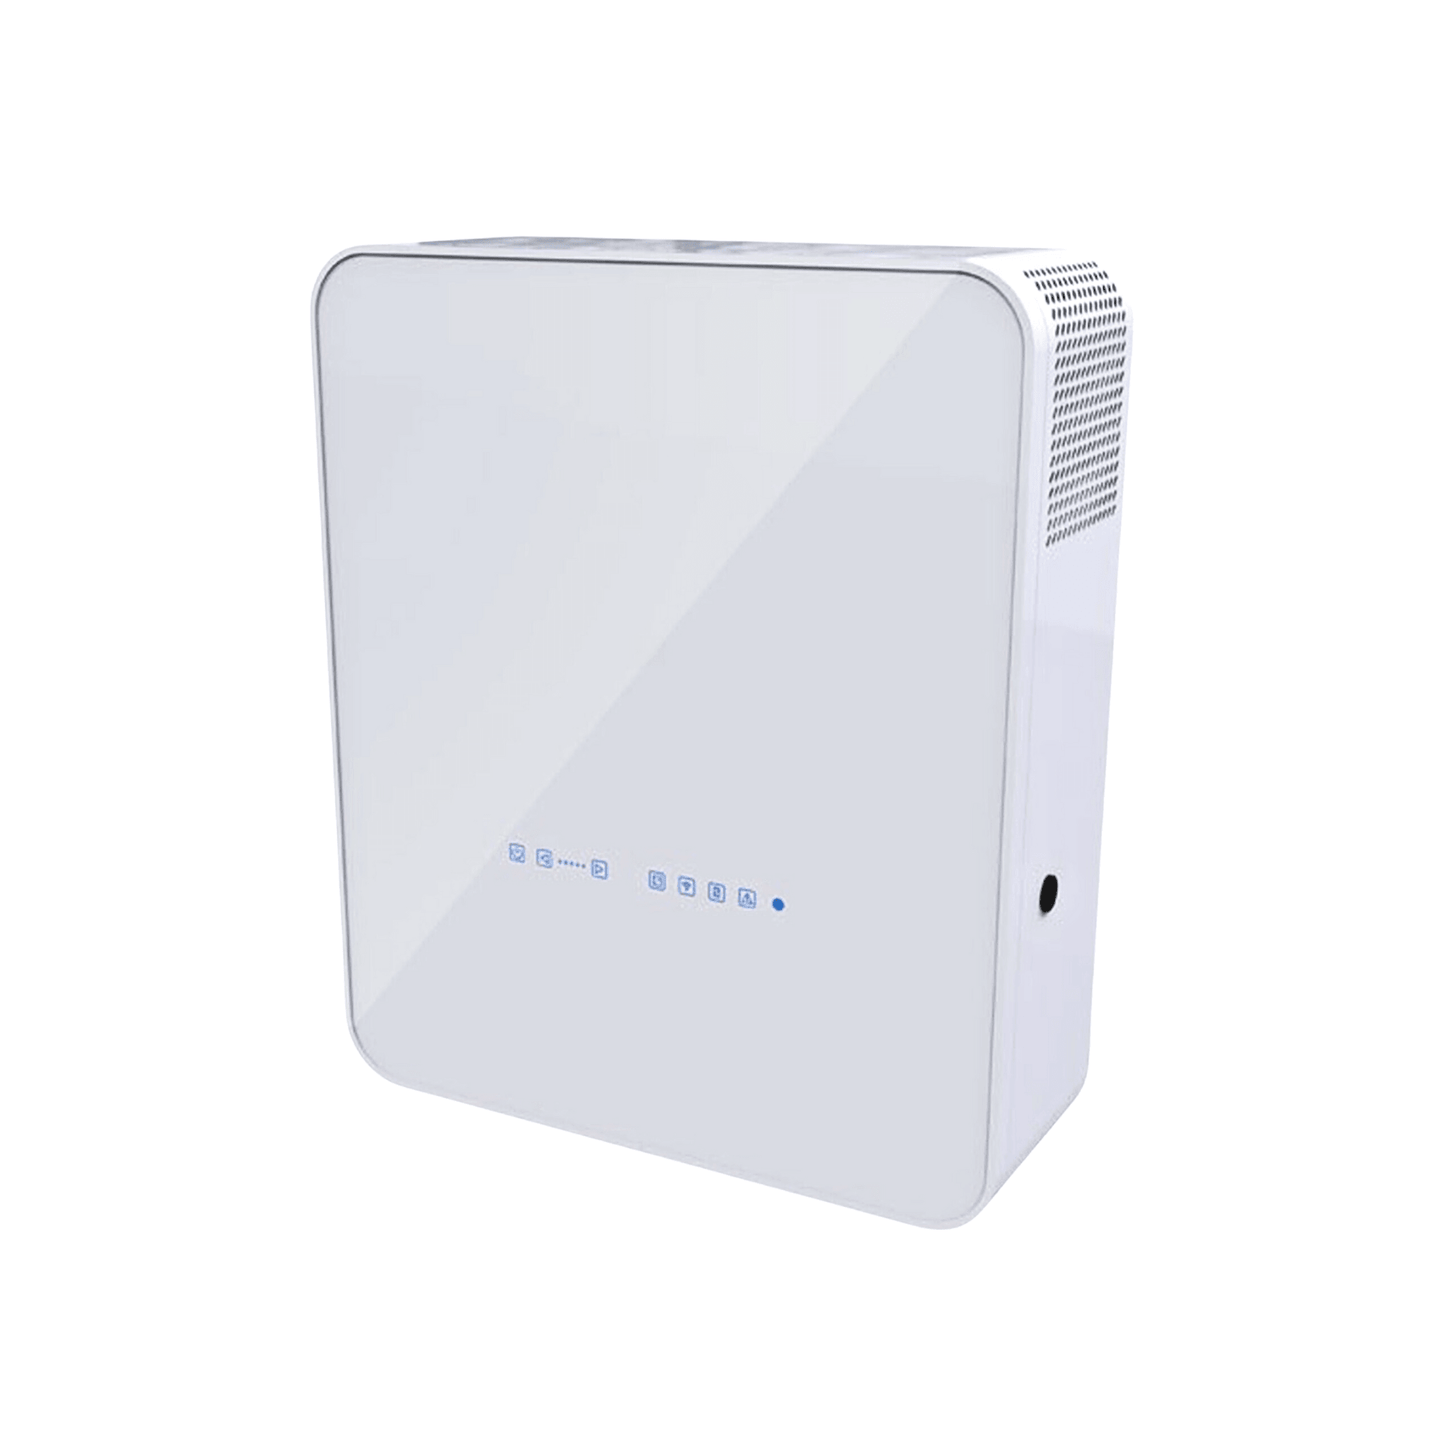 Vents Freshbox 100 WiFi Single Room Ductless HRV